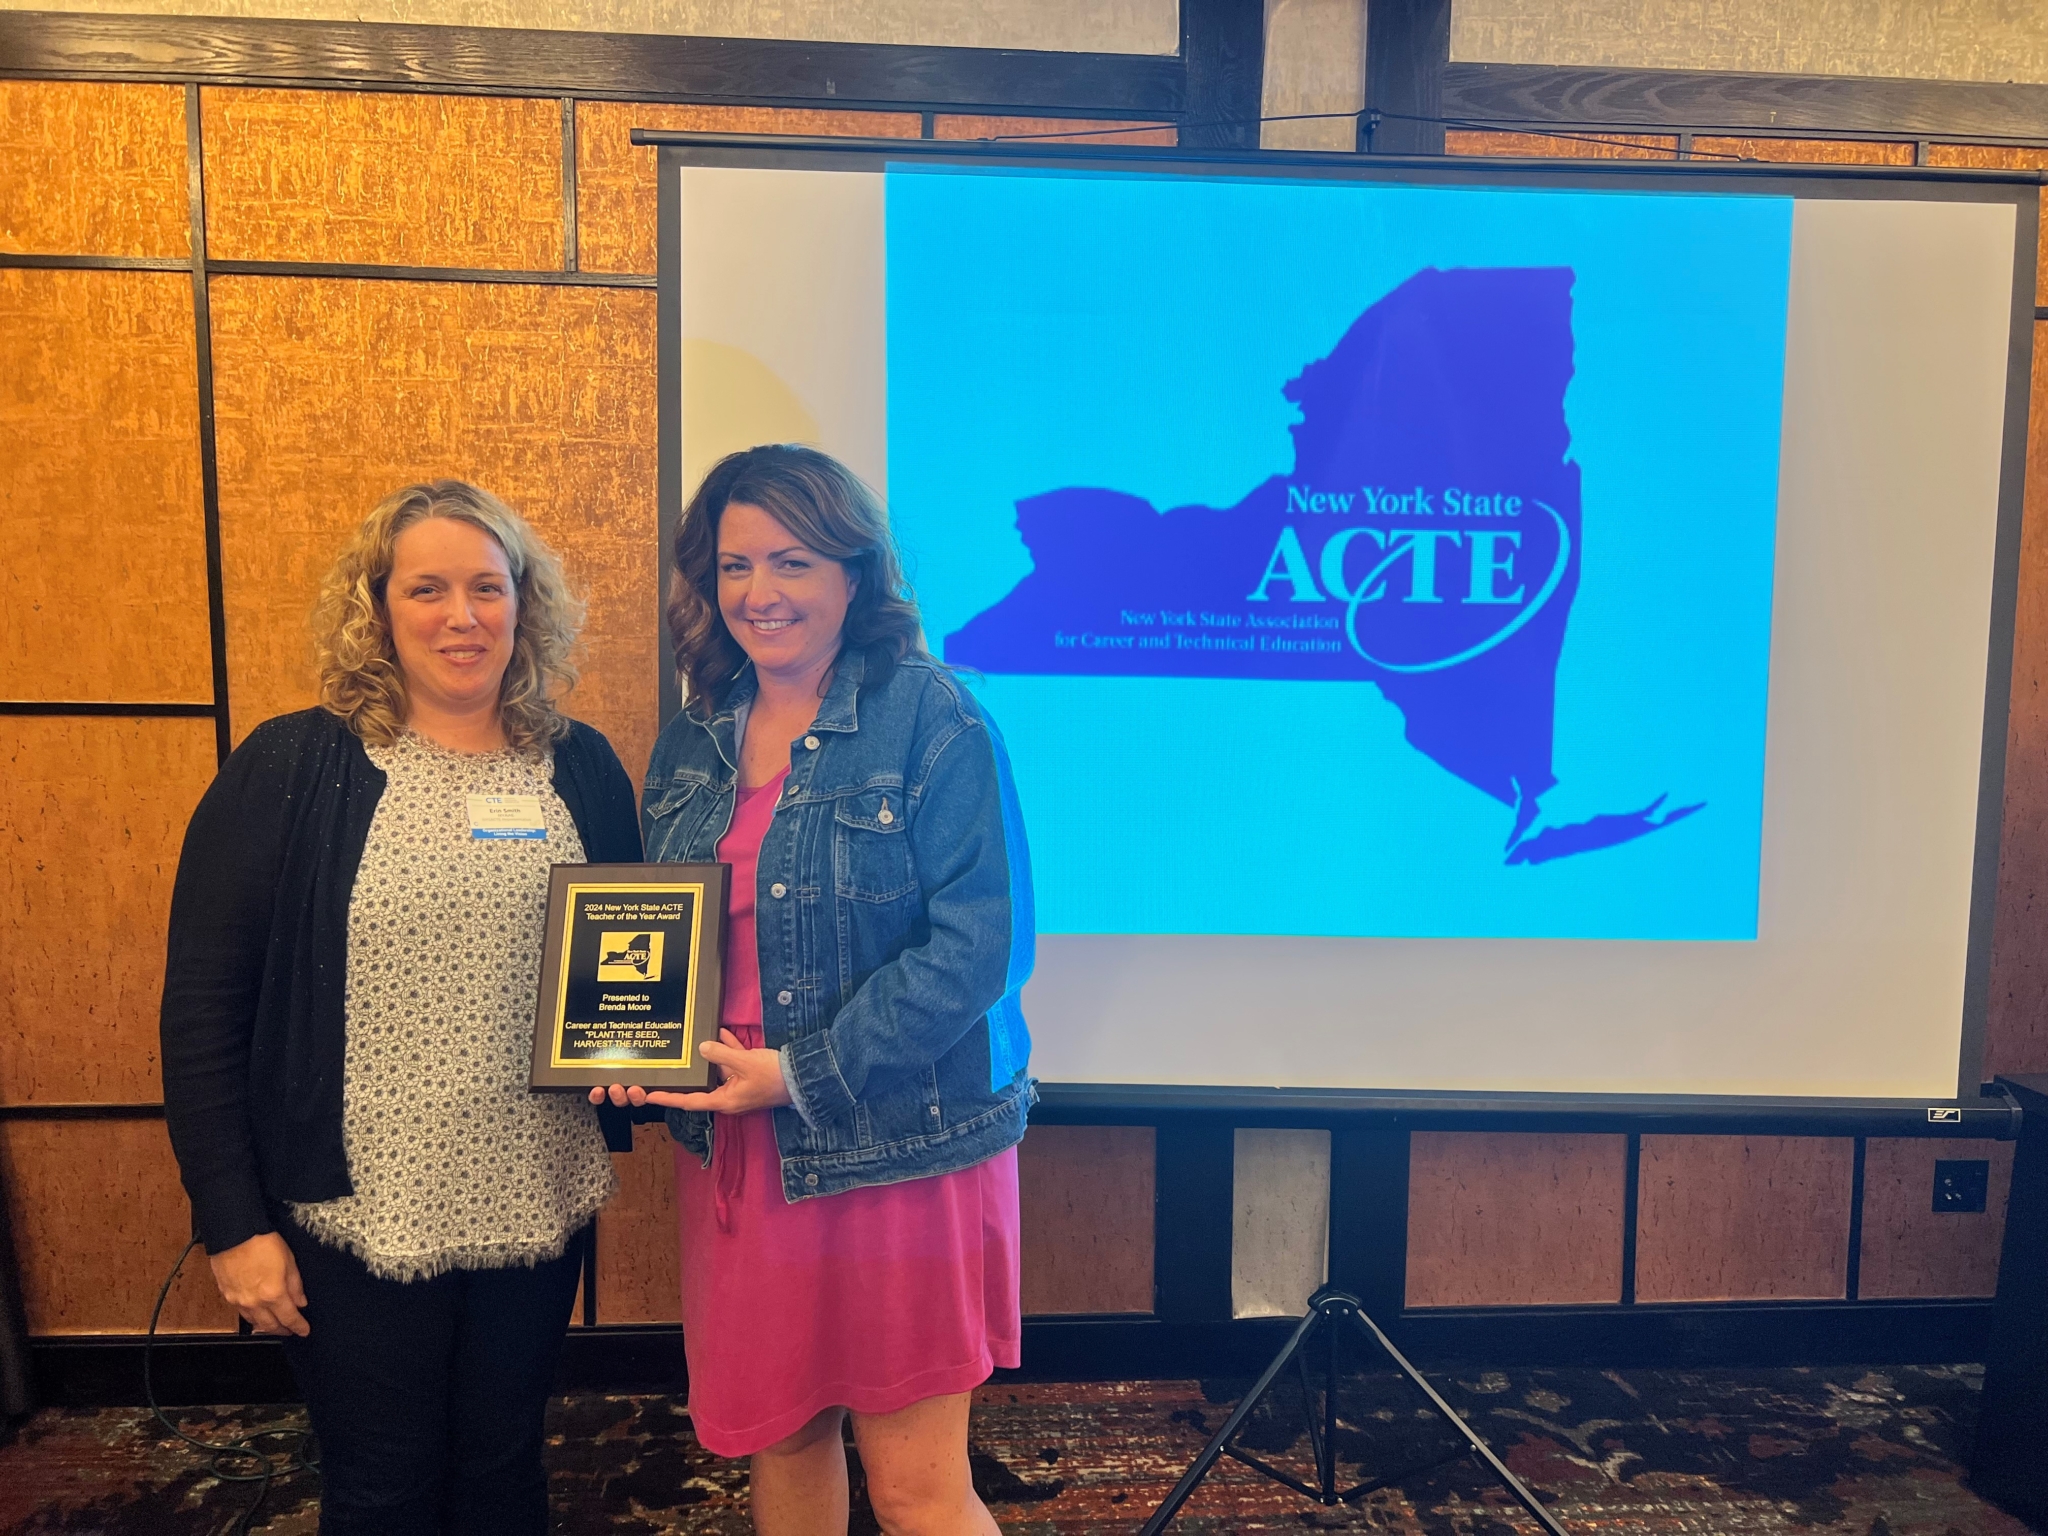 New York State Association for Career and Technical Education ACTE